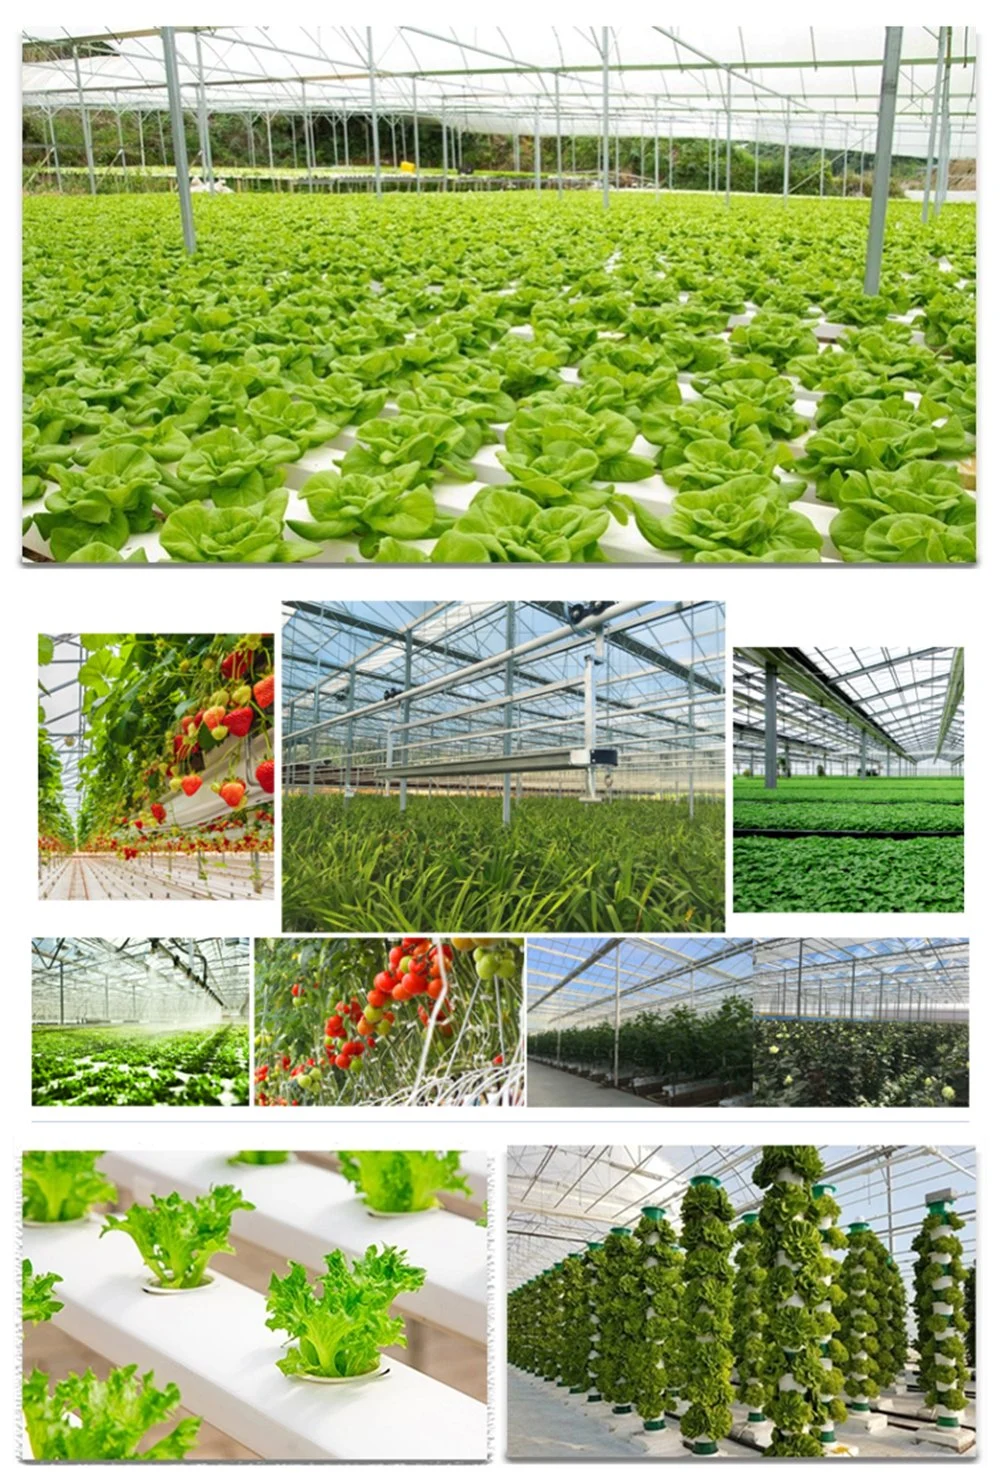 Agriculture Productive Glass Multi-Span/Vertical/Hydroponic Greenhouse for Plant/Garden/Vegetable/Fruit/Watermelon/Commercial/Agricultural Tents